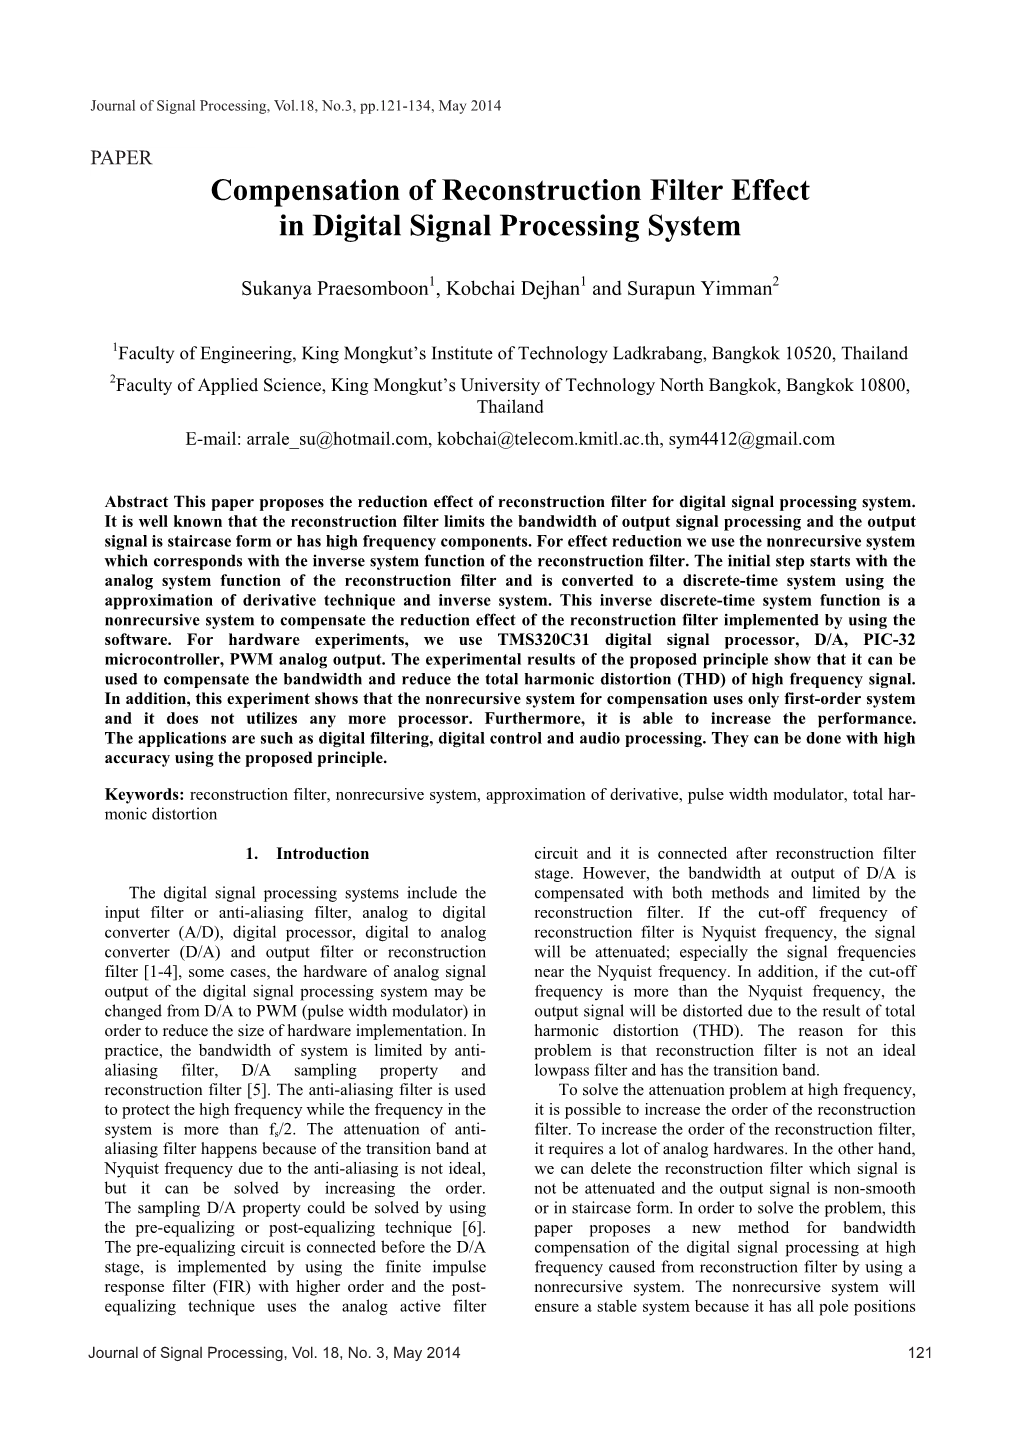 Compensation of Reconstruction Filter Effect in Digital Signal Processing System